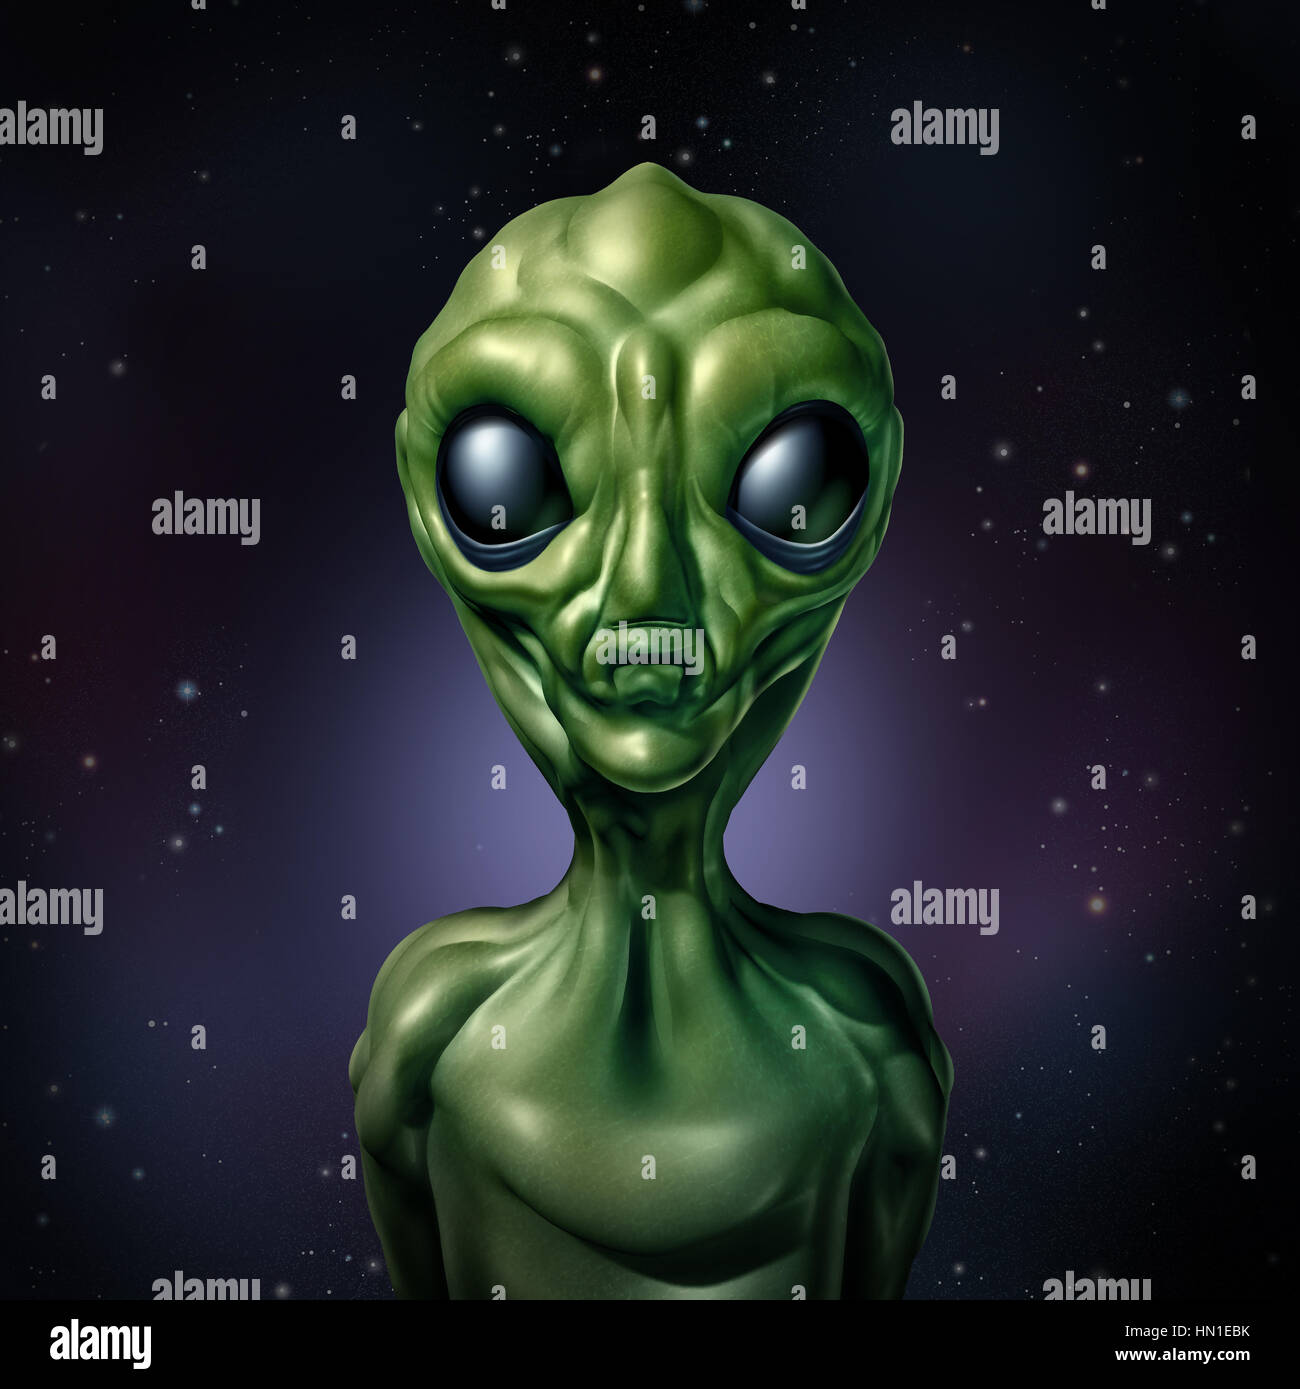 Alien UFO character and extraterrestrial humanoid green creature sightings concept as a symbol for the search for intelligent life in the universe. Stock Photo